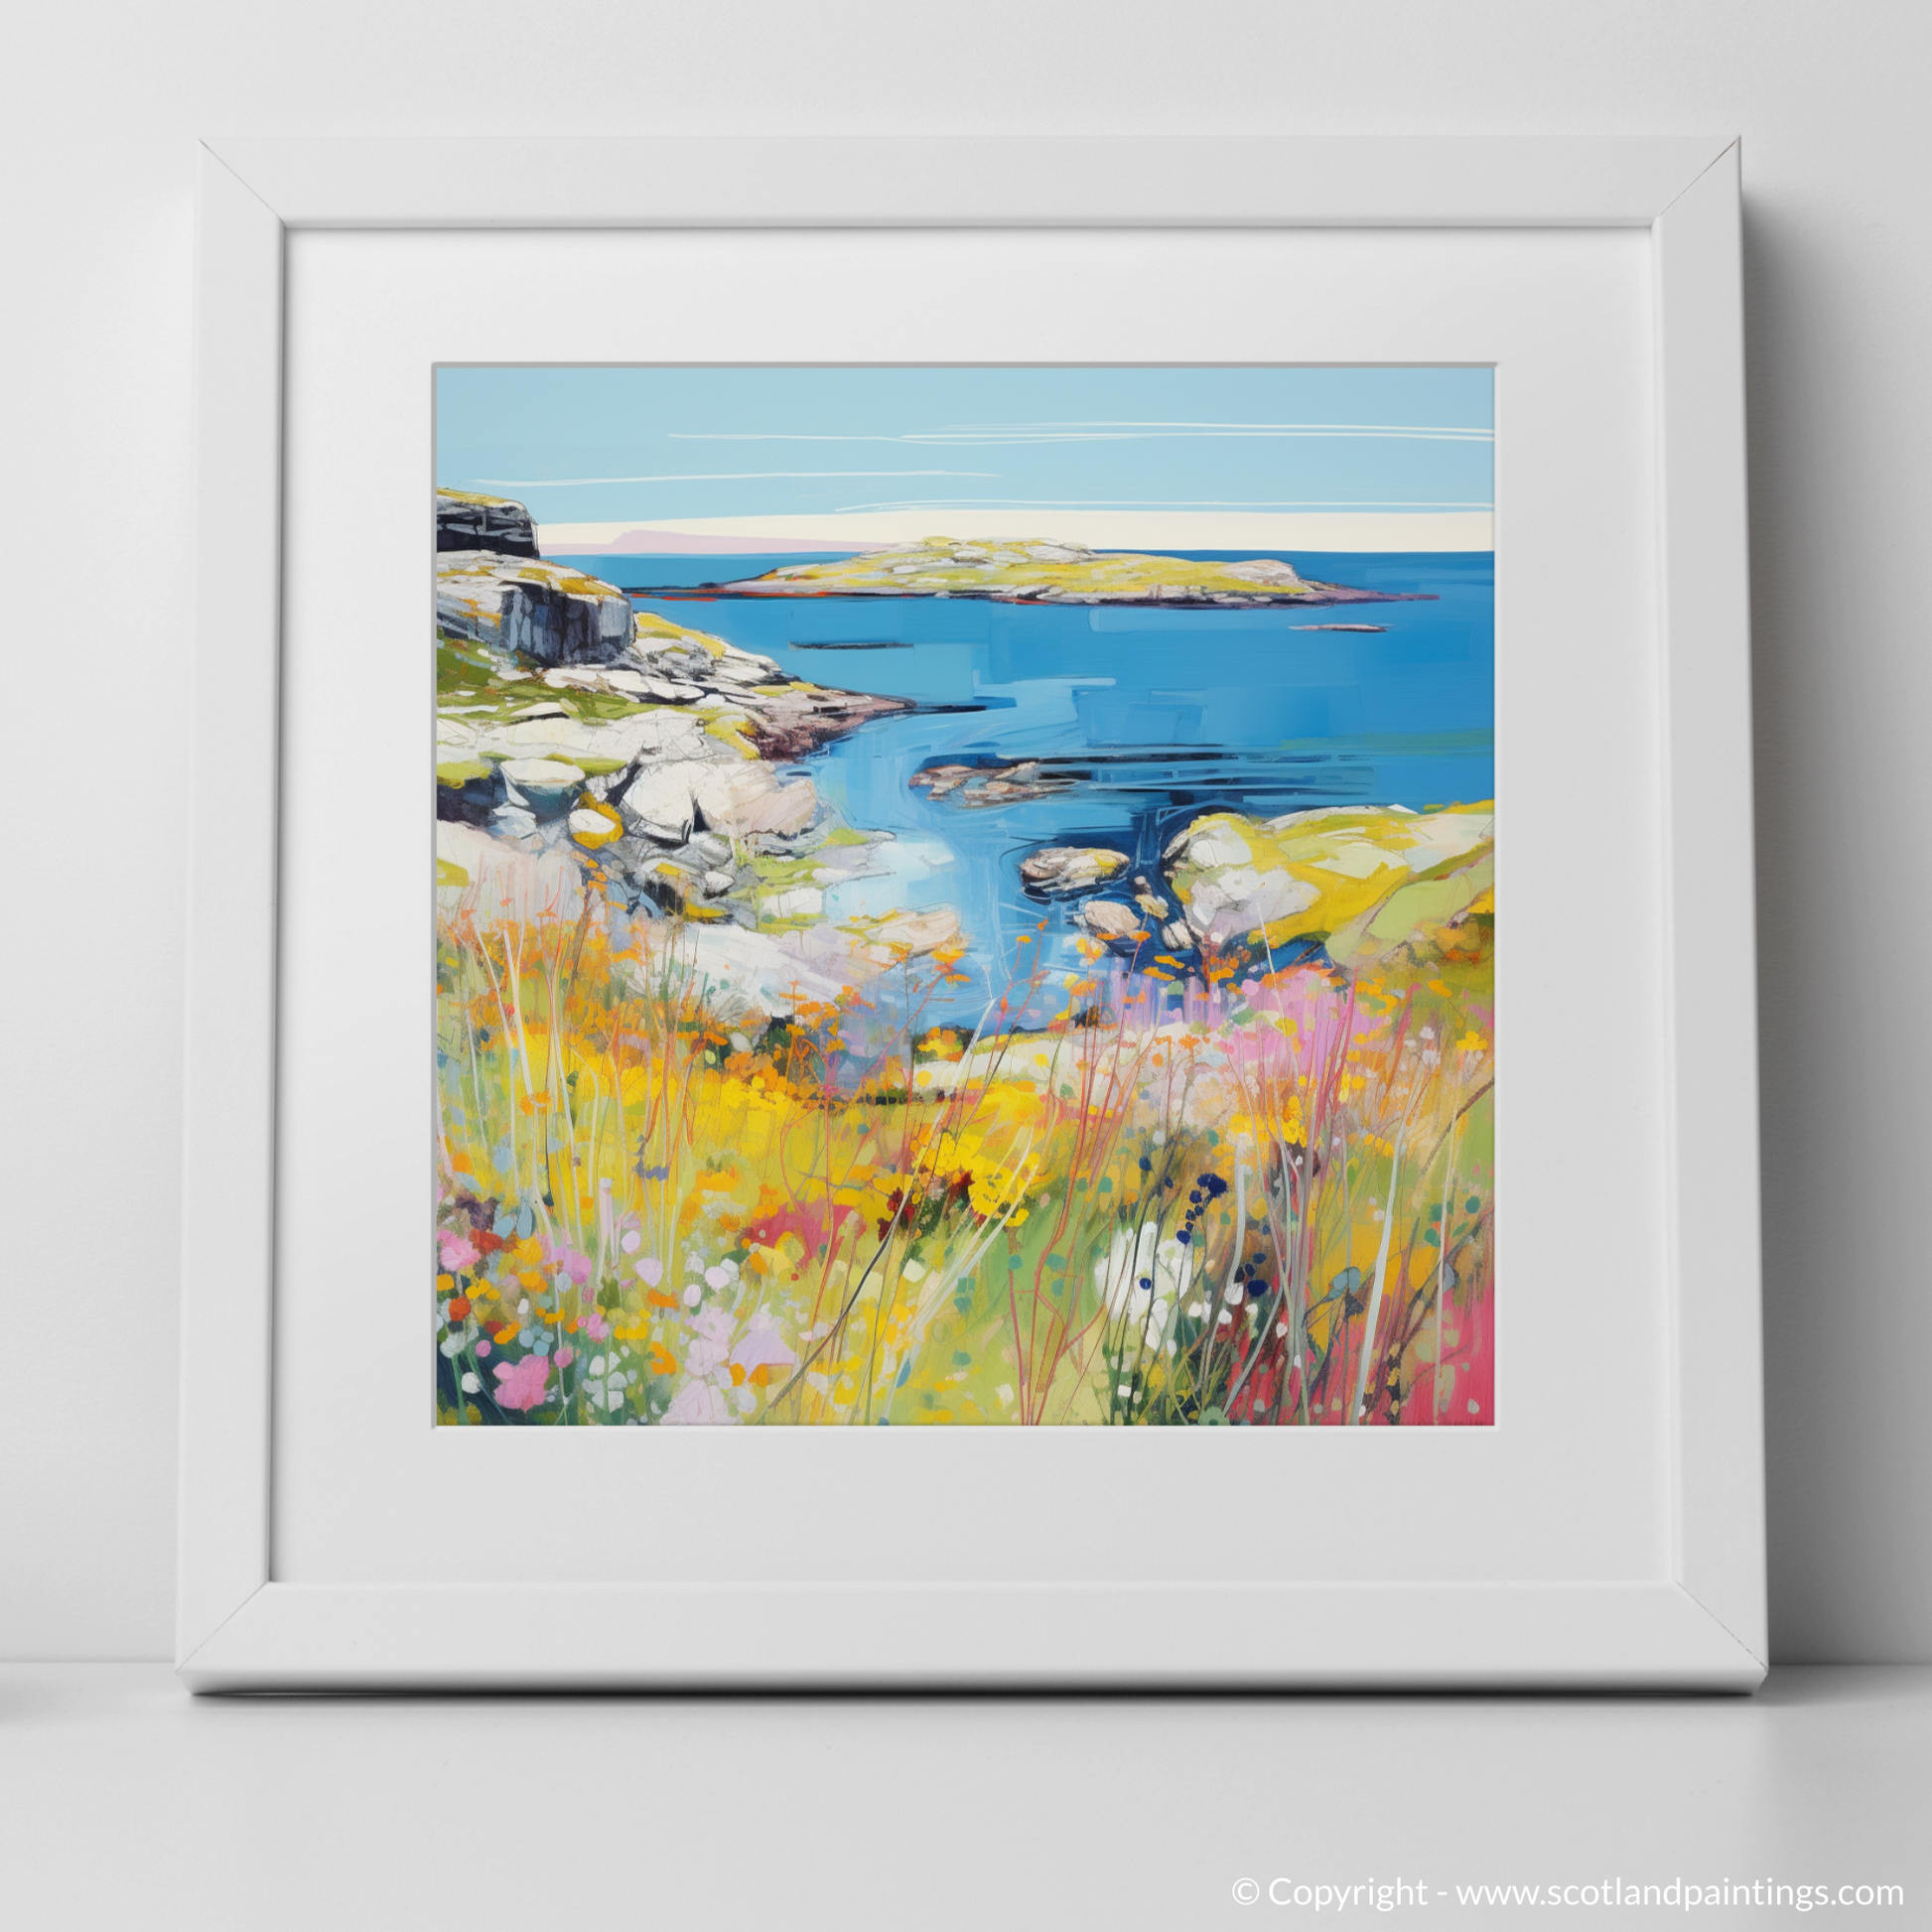 Art Print of Isle of Scalpay, Outer Hebrides in summer with a white frame